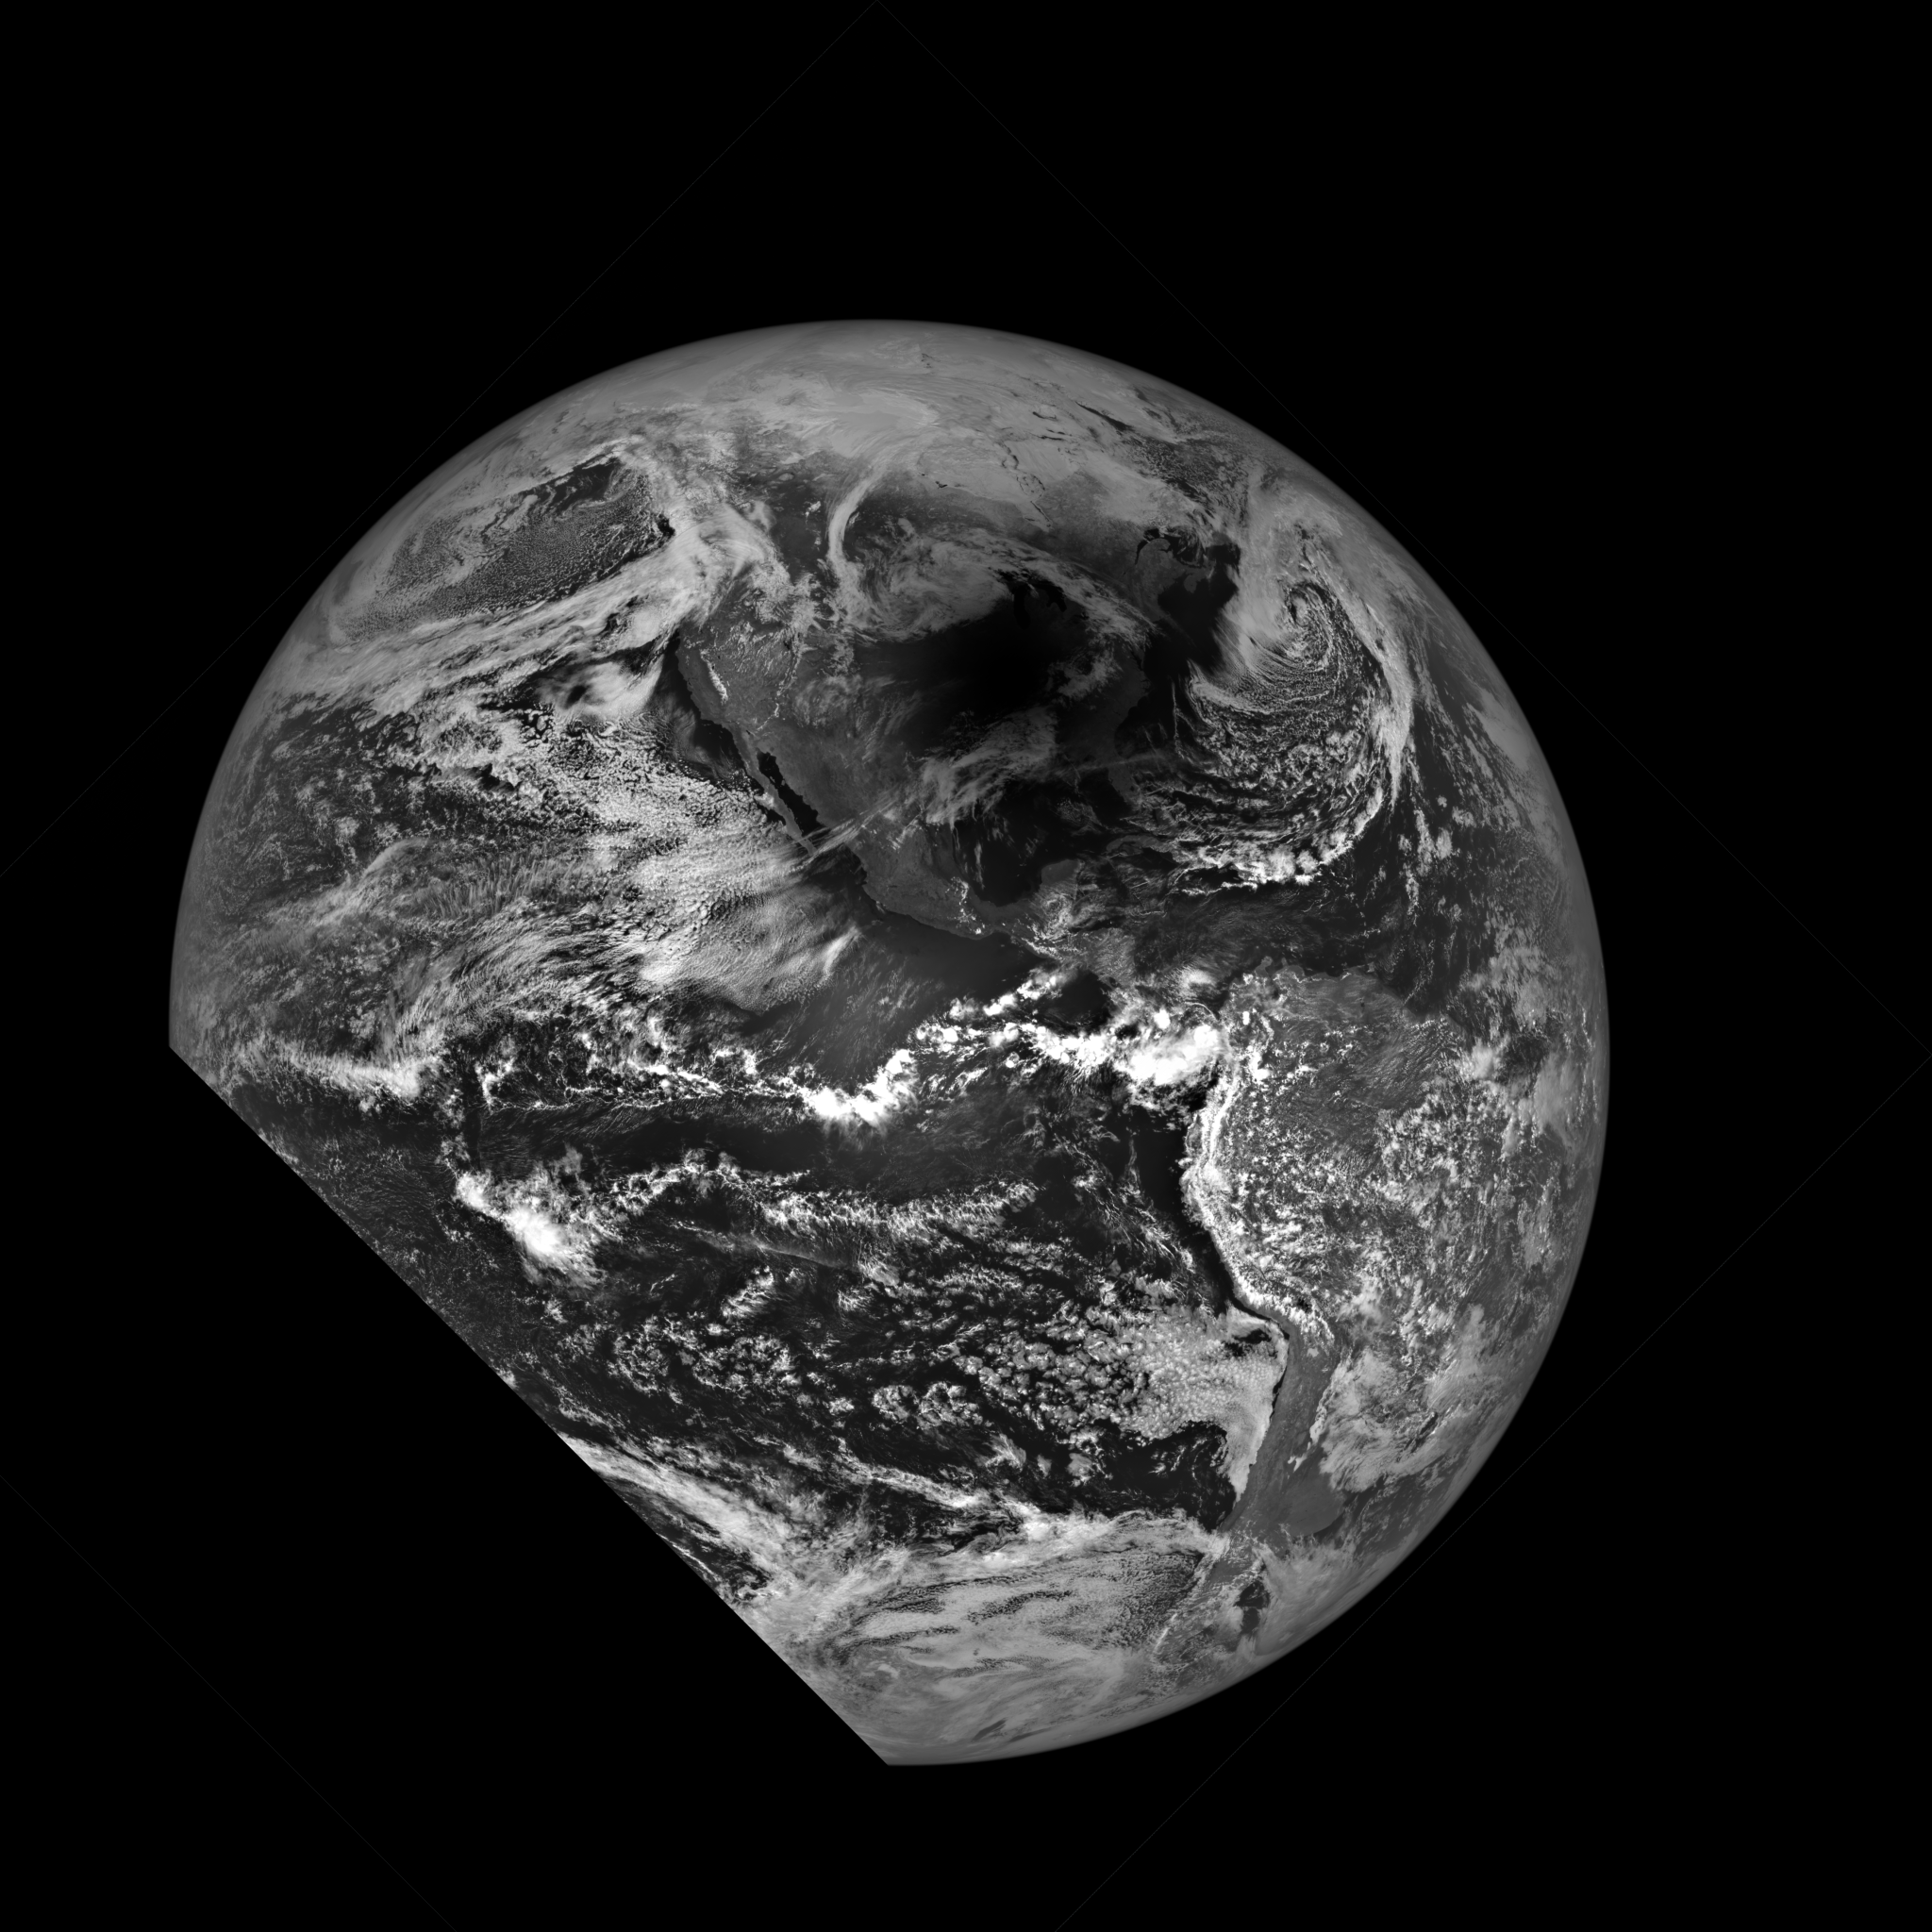 Black and white image of Earth with swirling white clouds and a dark shadow over the middle portion of the planet from the Moon eclipsing the Sun.